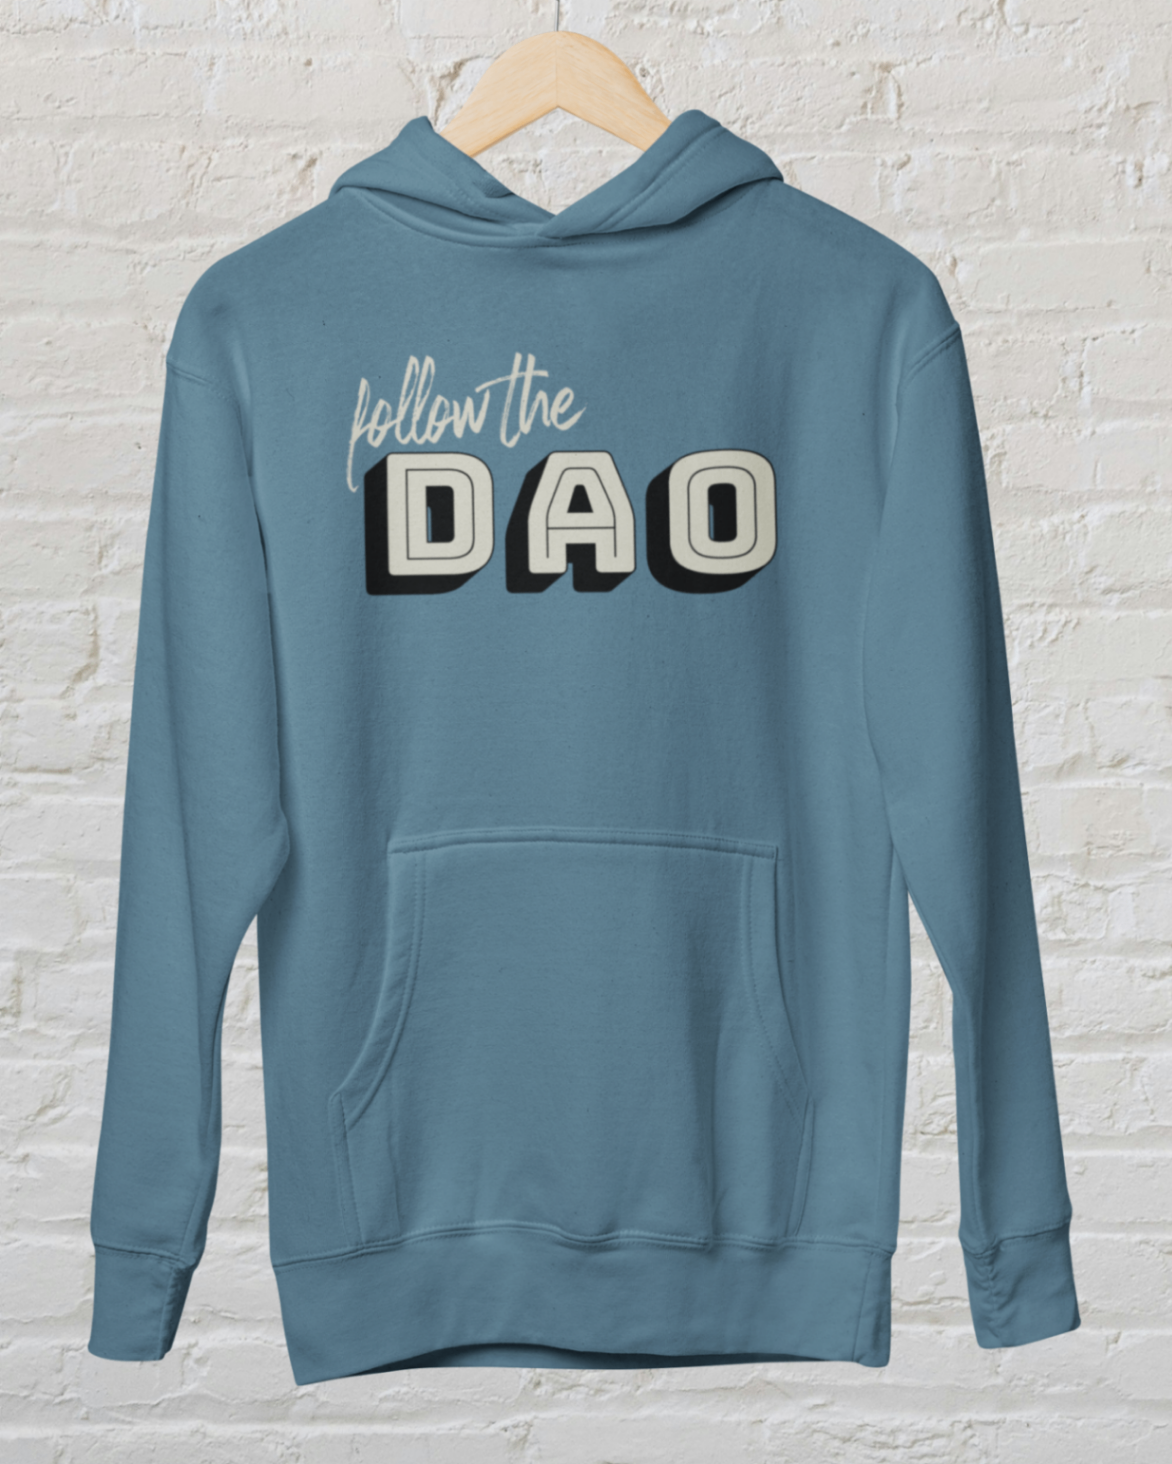 an Airforce blue hoodie with follow the dao design over a white brick backround